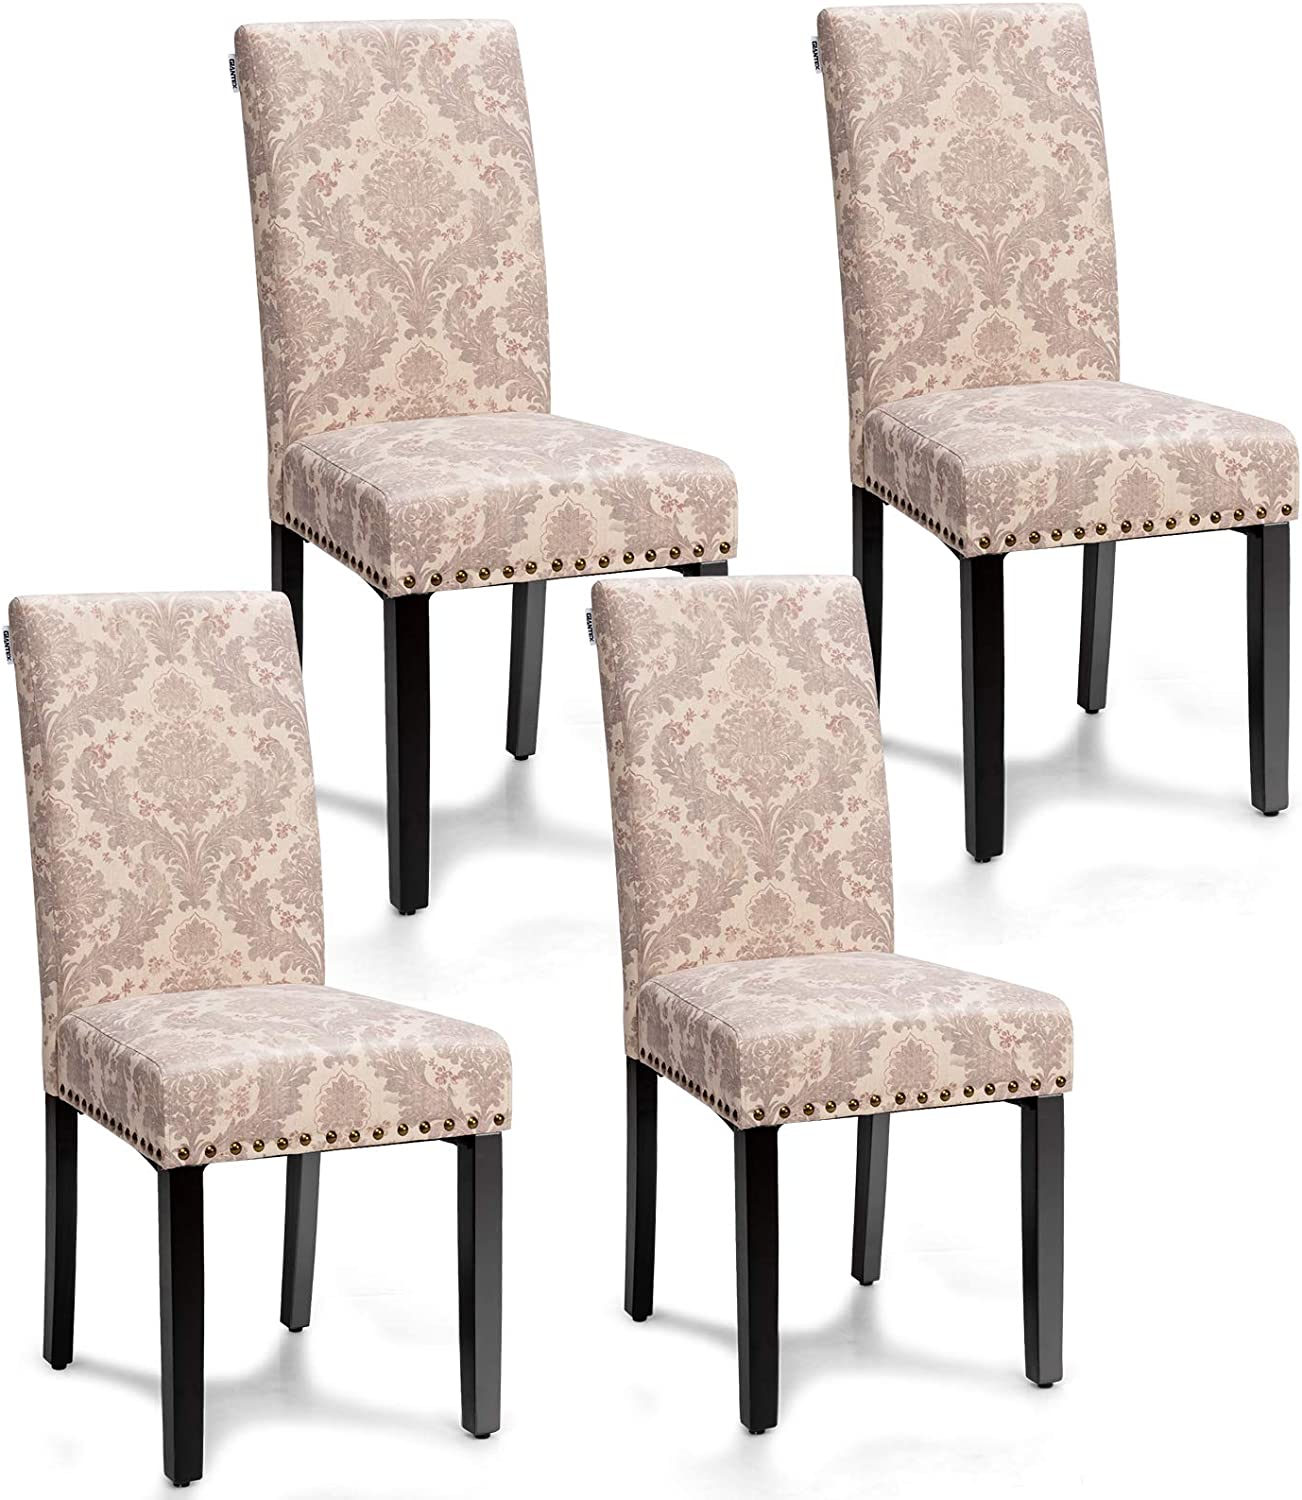 Upholstered Dining Chairs Set of 2 or 4, Fabric Side Chairs w/Wood Legs